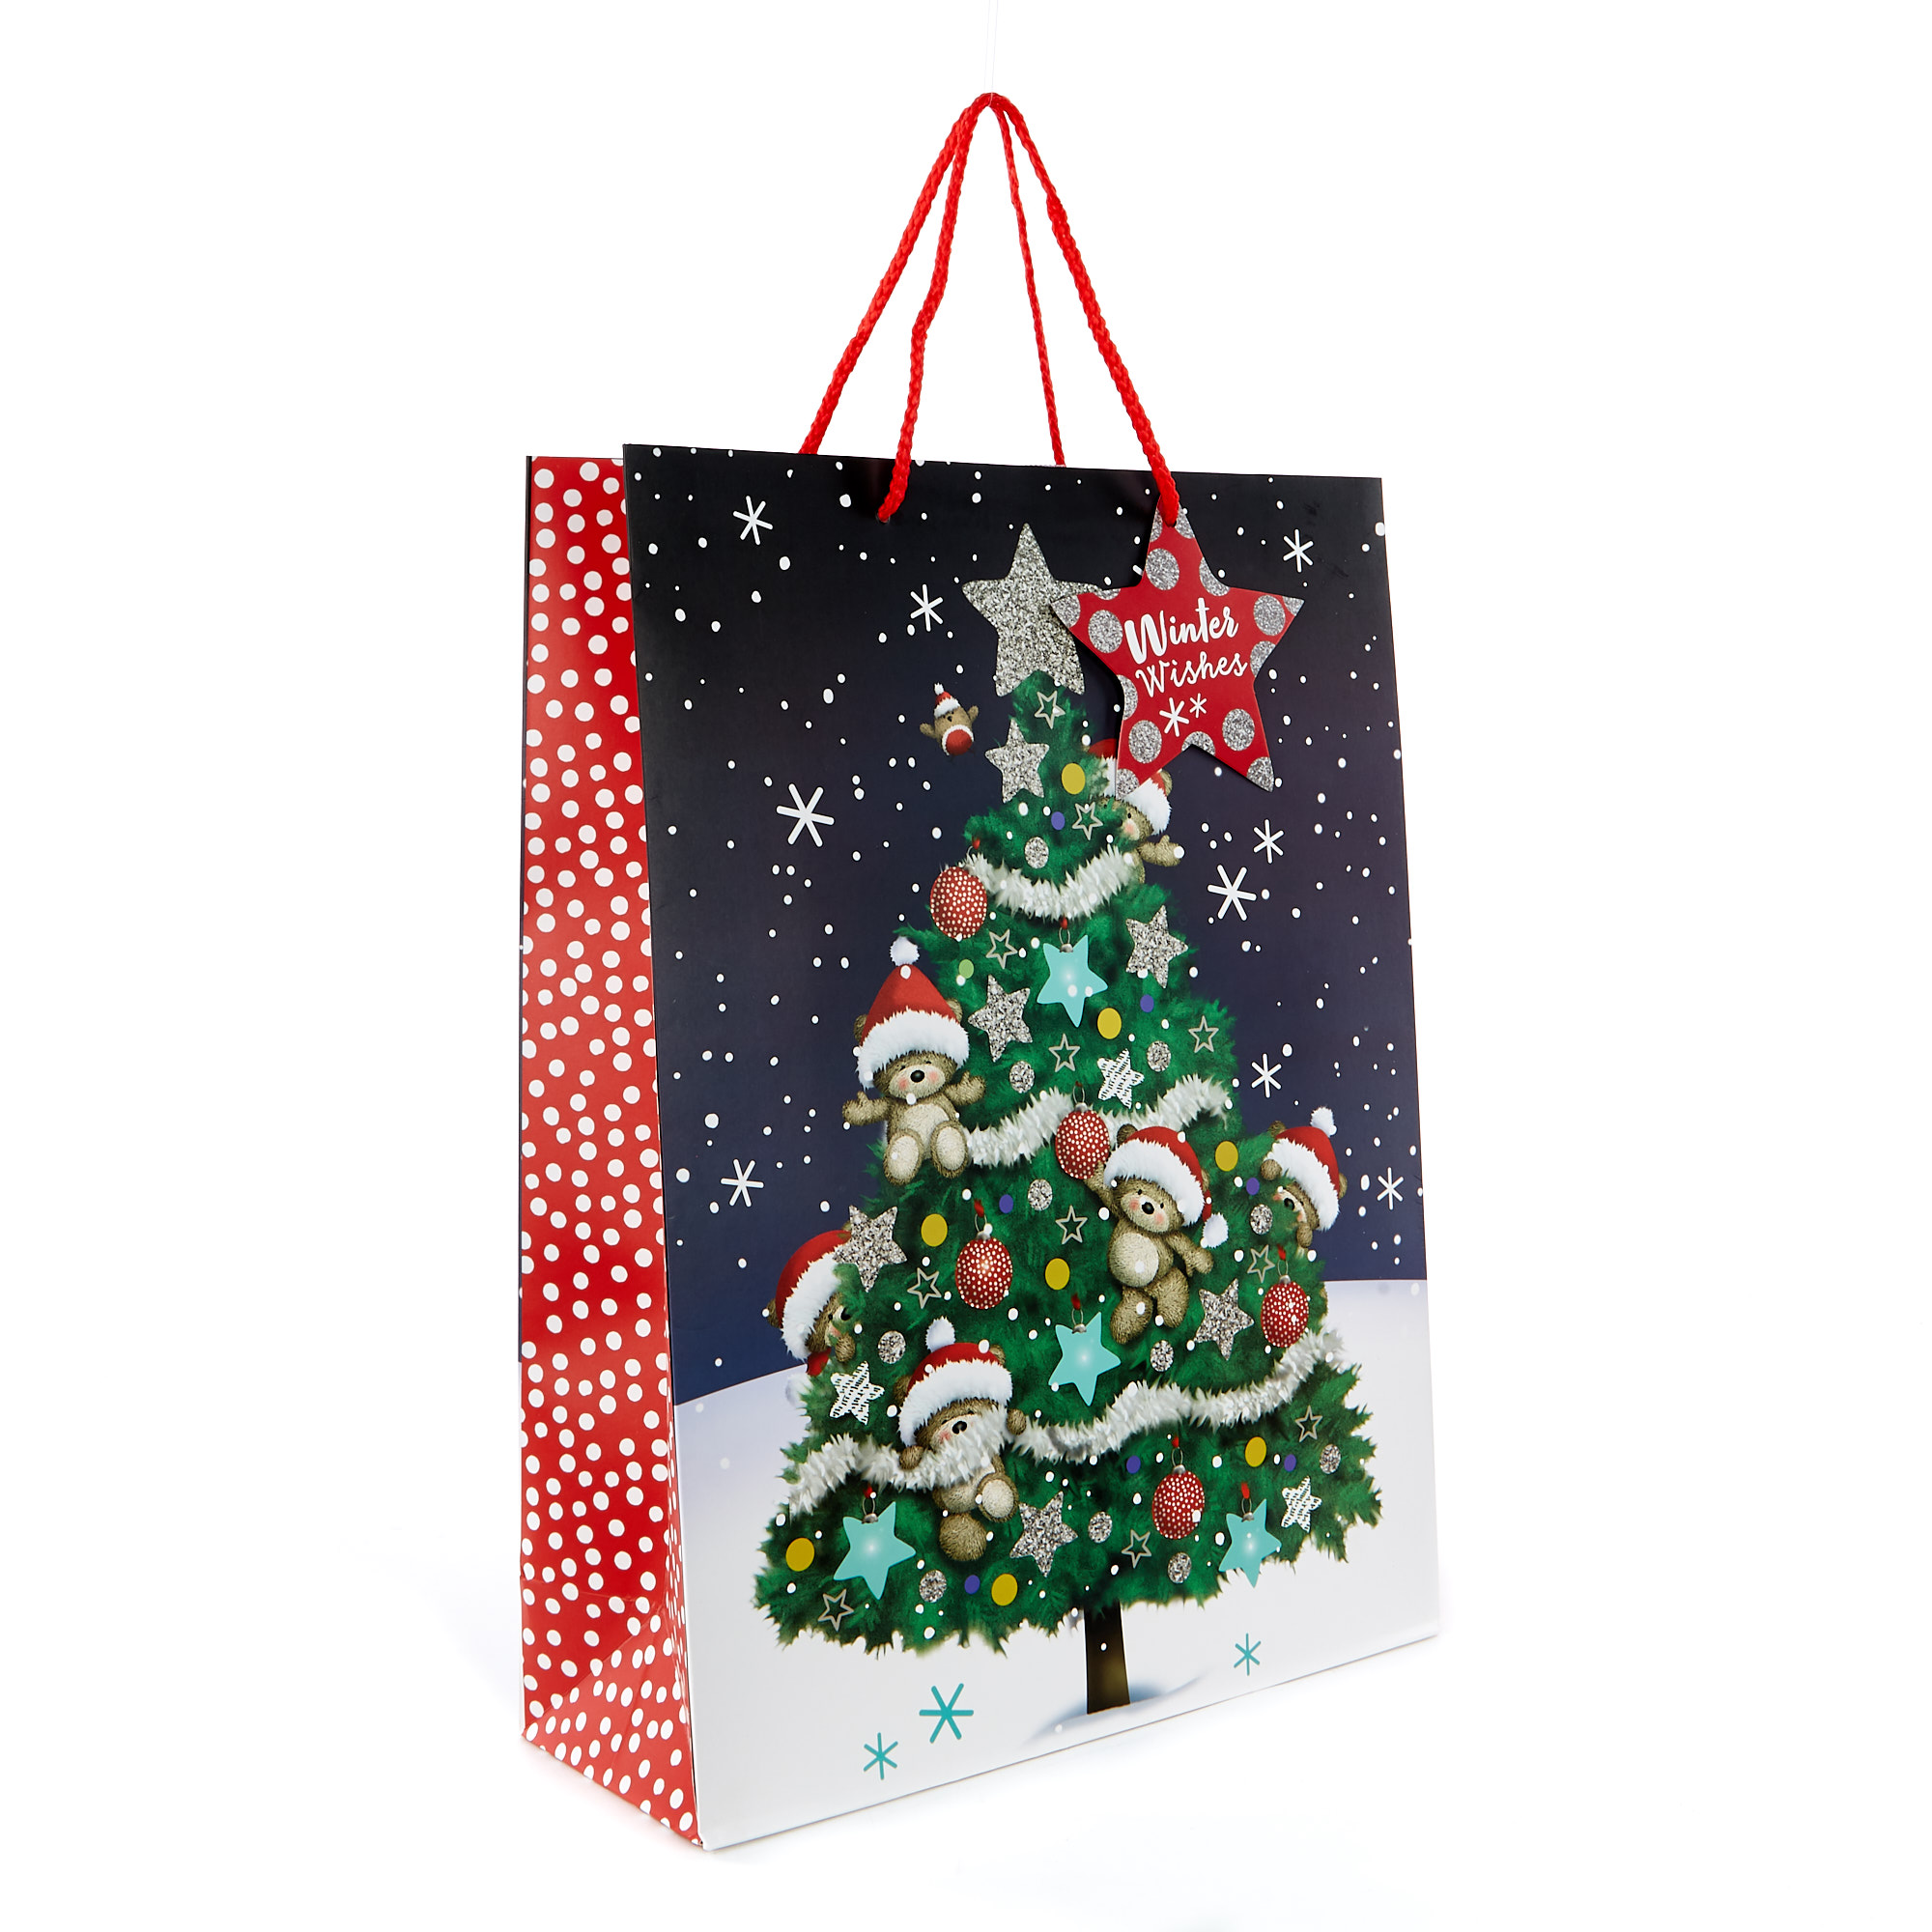 Extra Large Portrait Hugs Winter Wishes Christmas Gift Bag